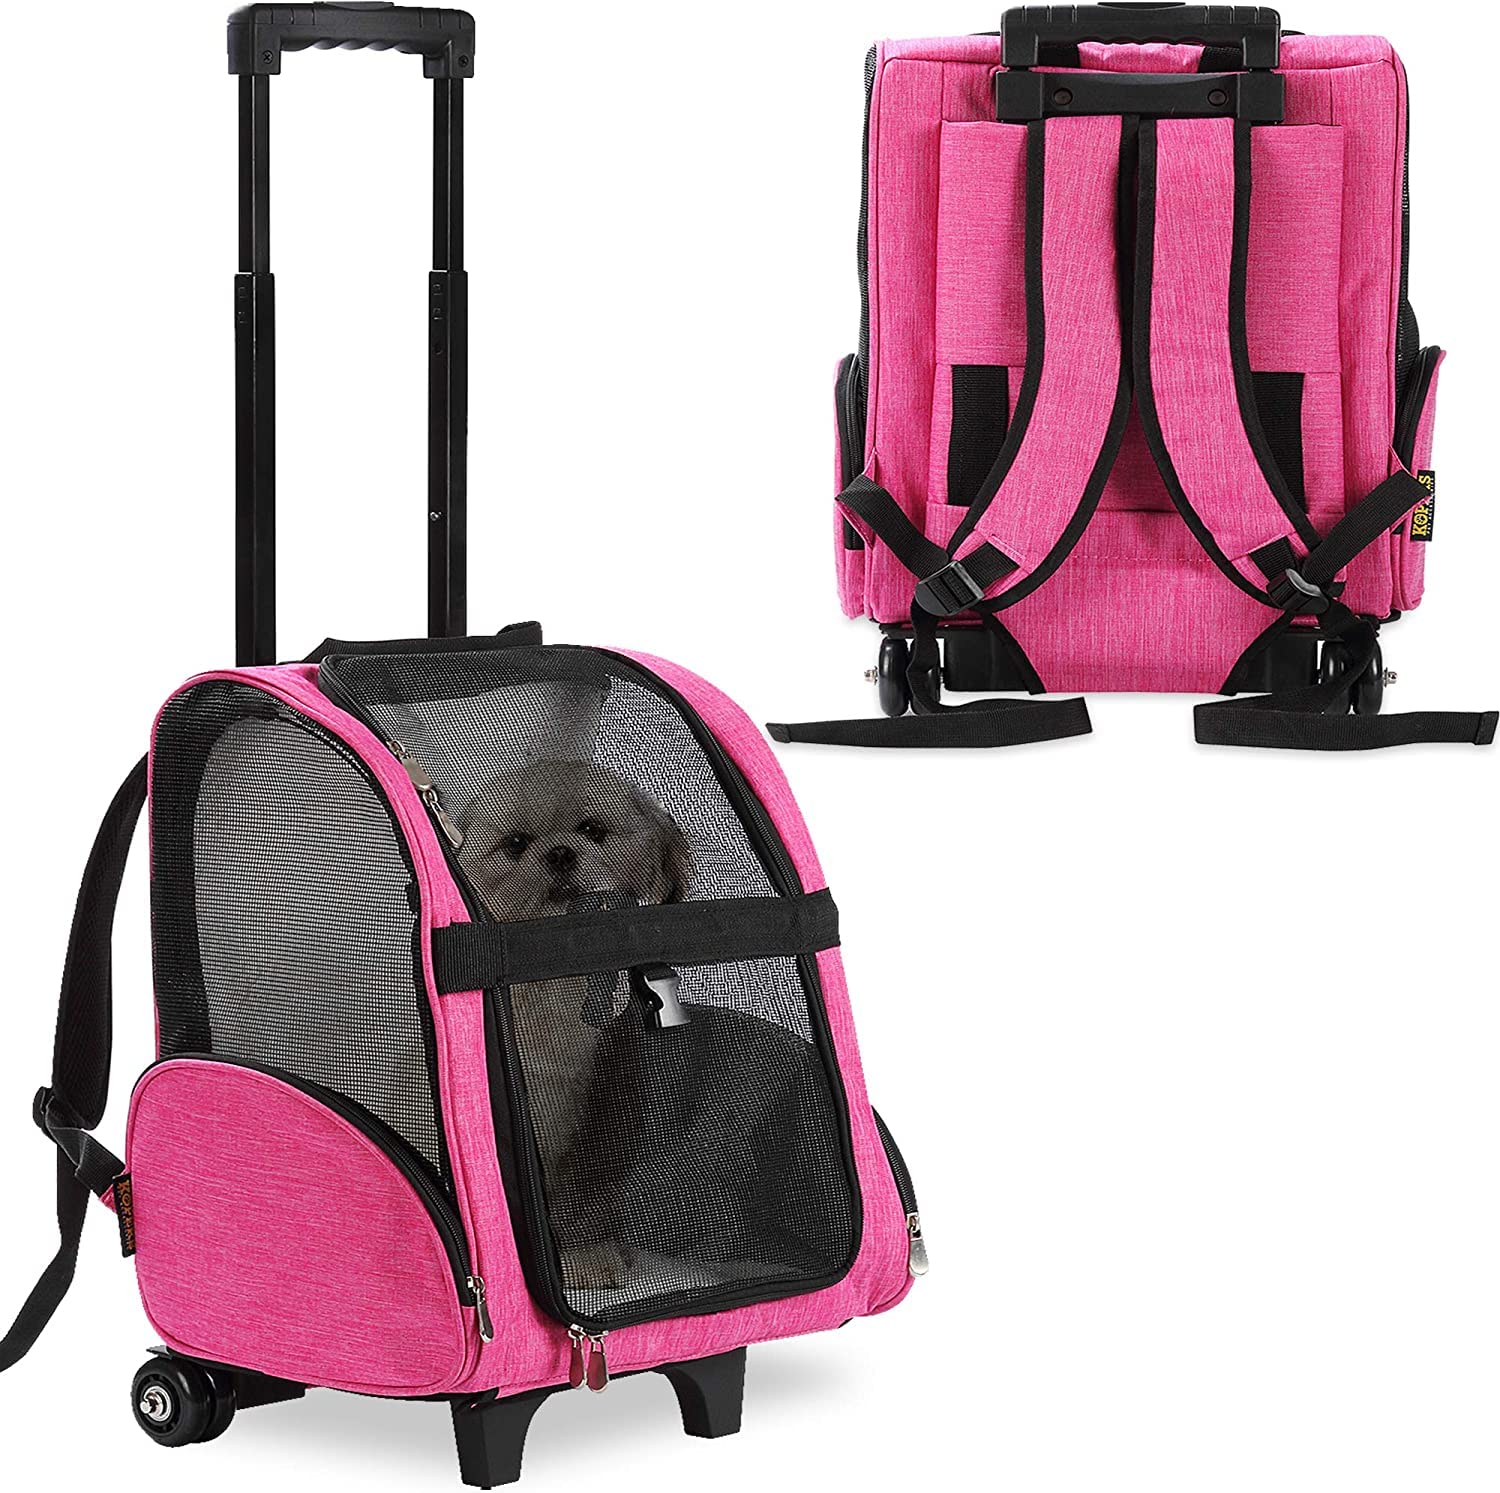 KOPEKS Deluxe Backpack Pet Travel carrier with Double Wheels - Pink - Large (KPS-1115)